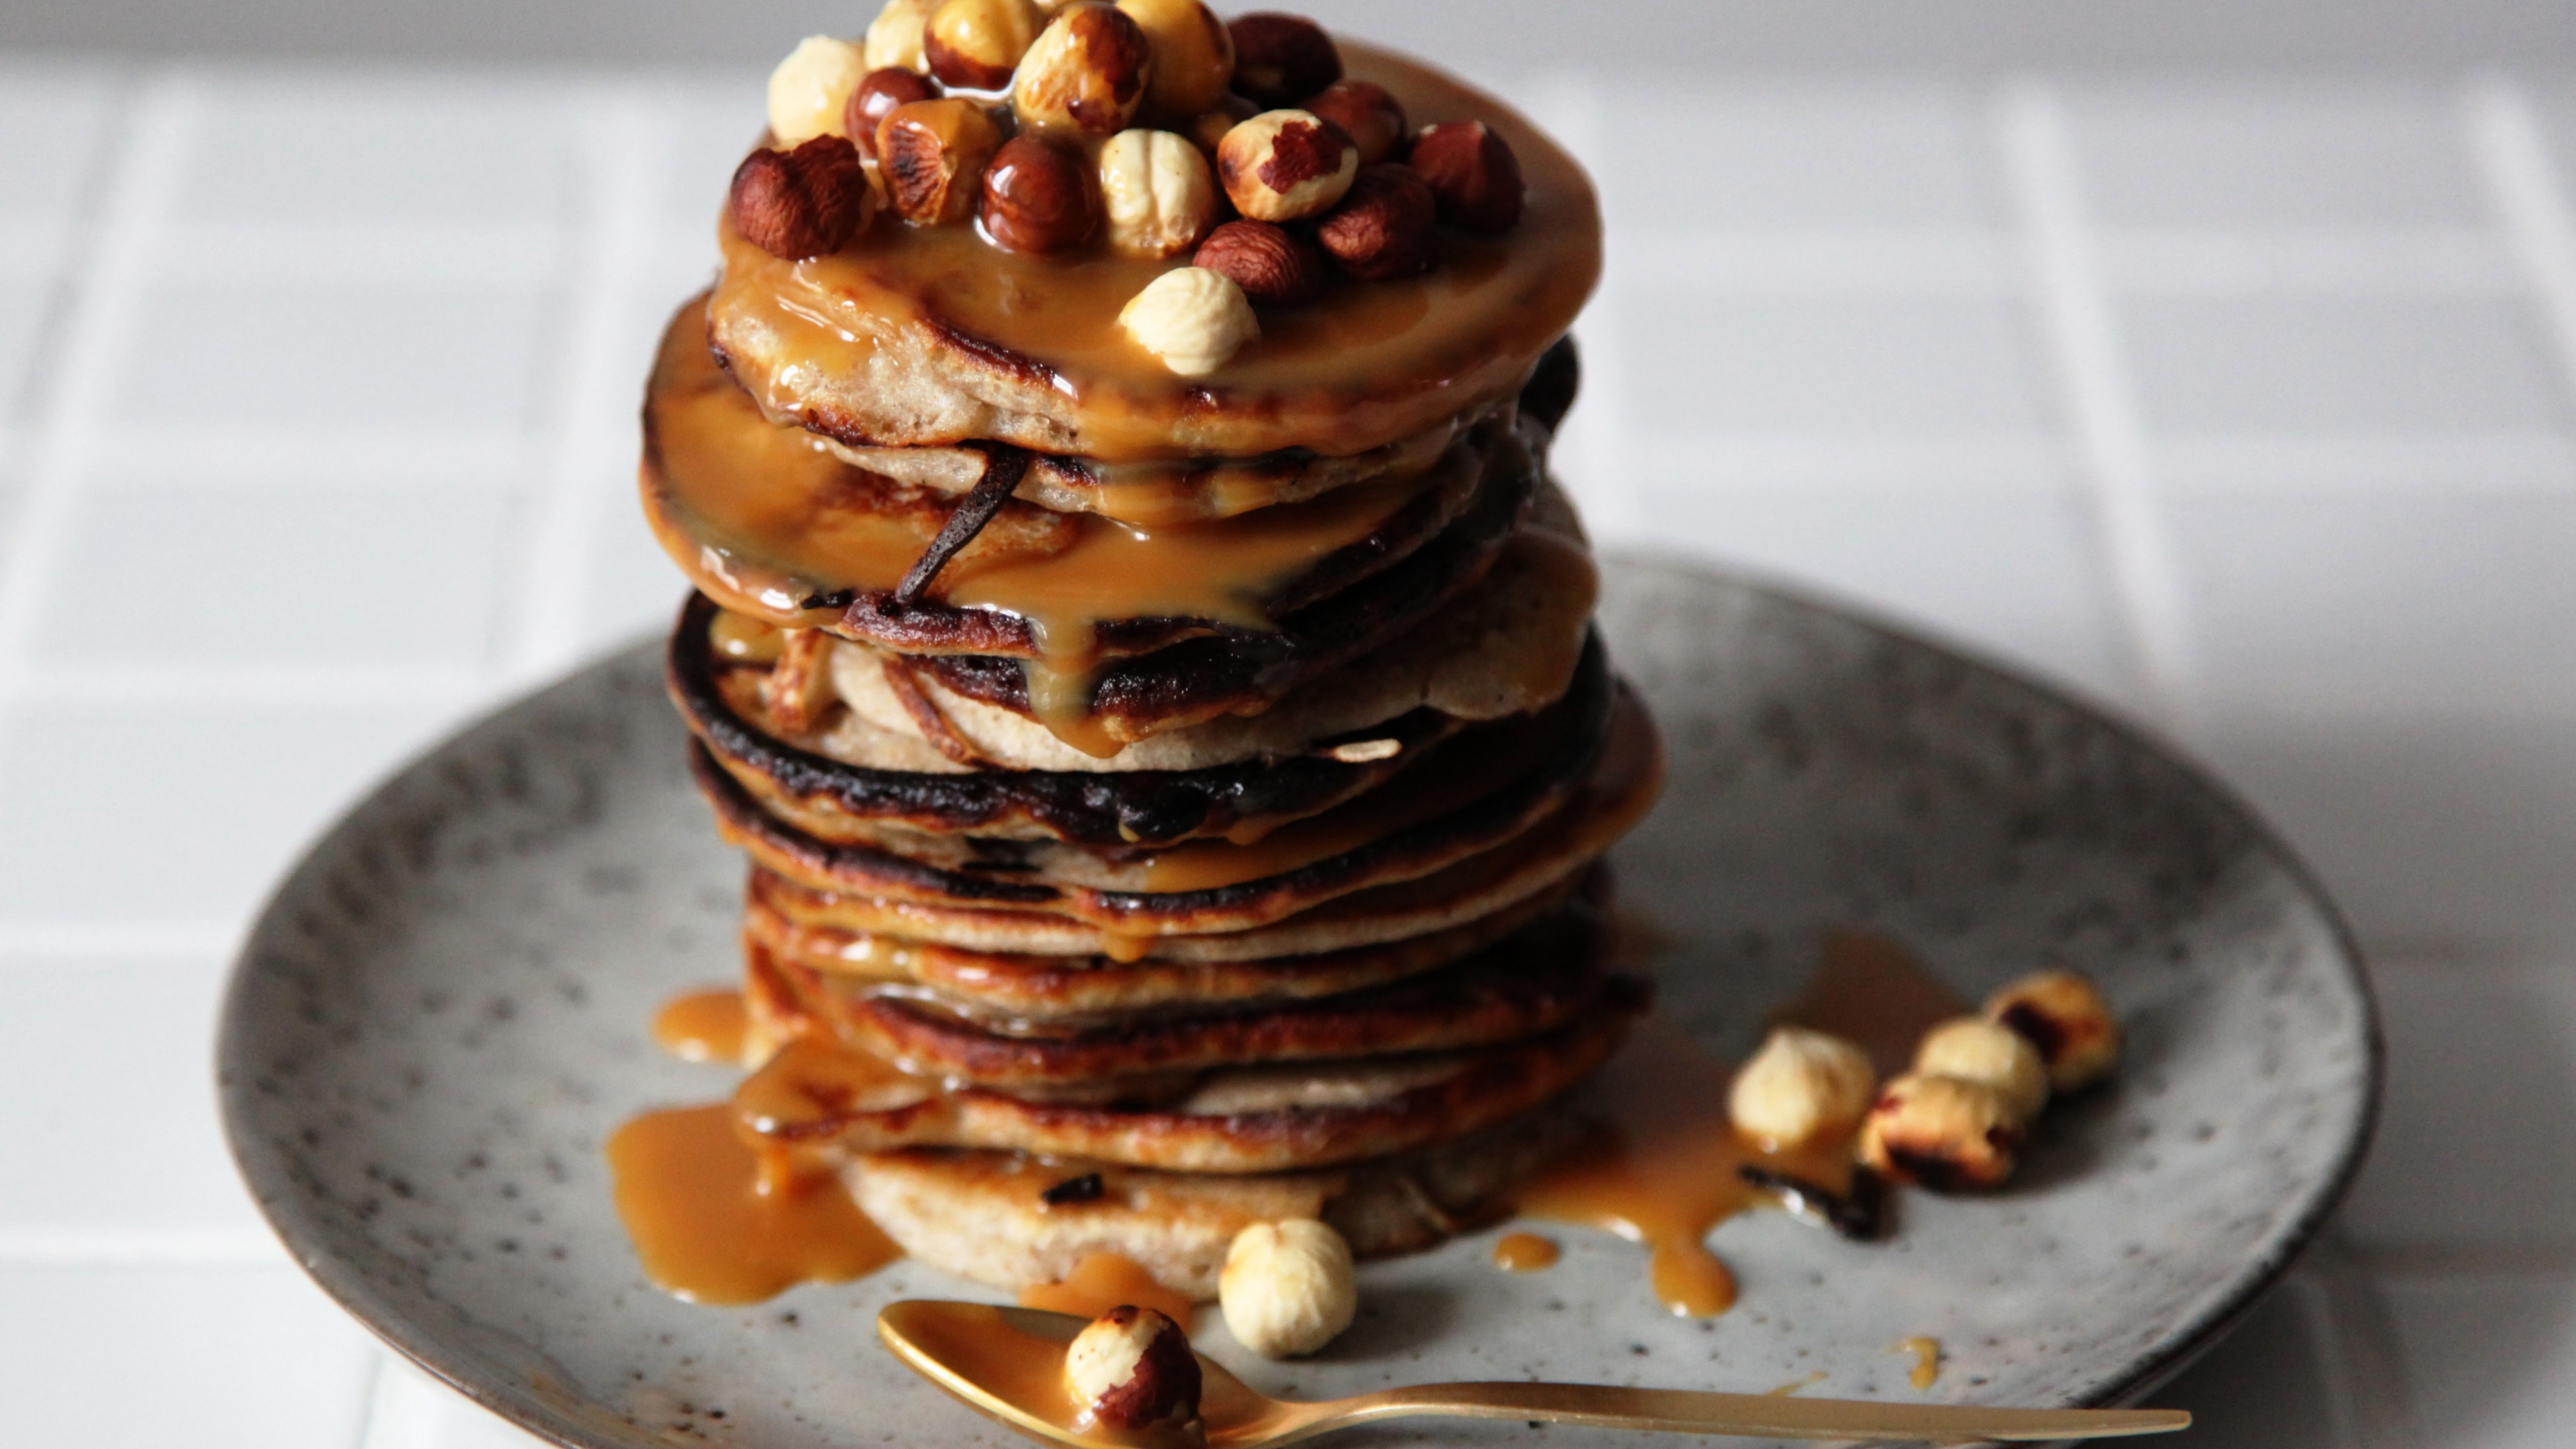 Maple syrup, Pancake stack, Mouth-watering breakfast, Sugary delight, 3840x2160 4K Desktop